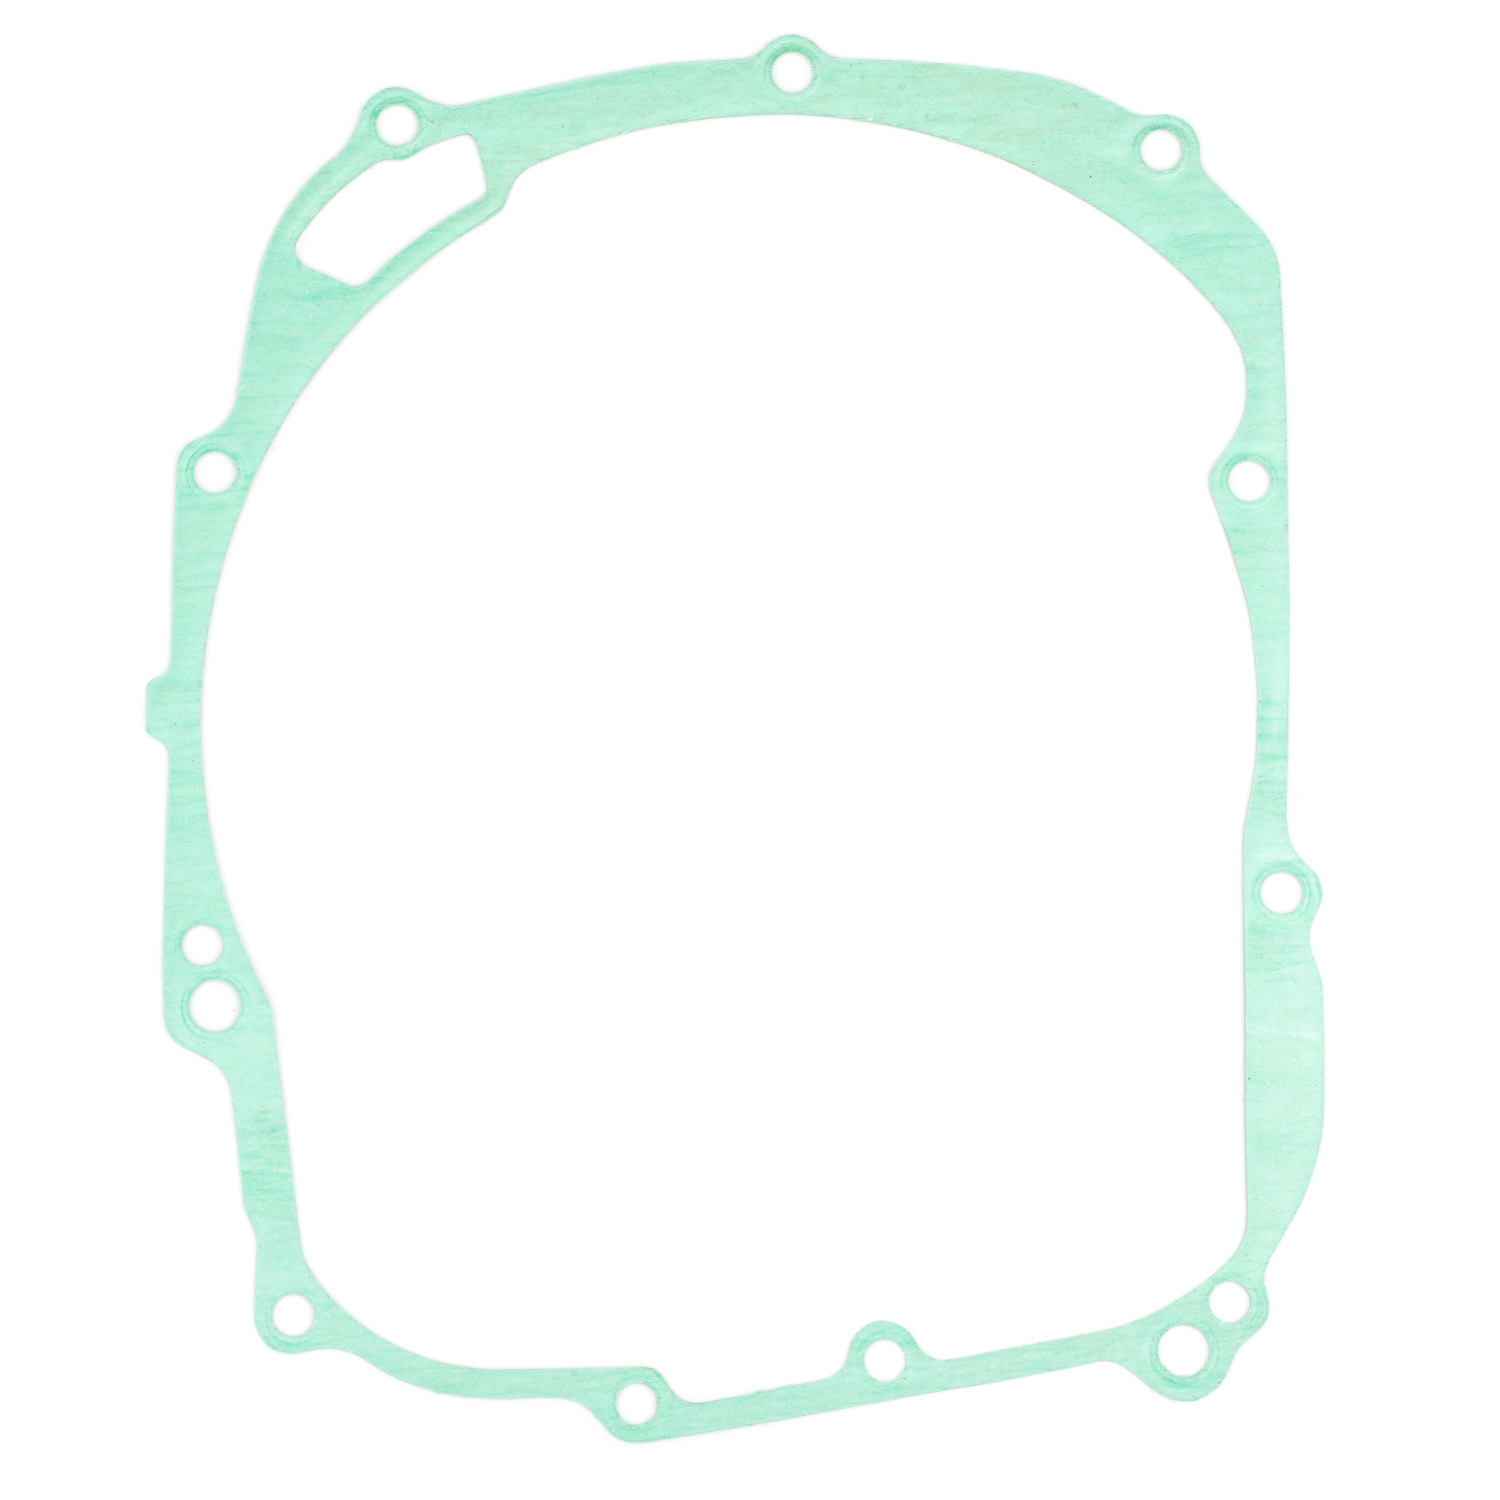 YZF1000R Thunderace Clutch Cover Gasket